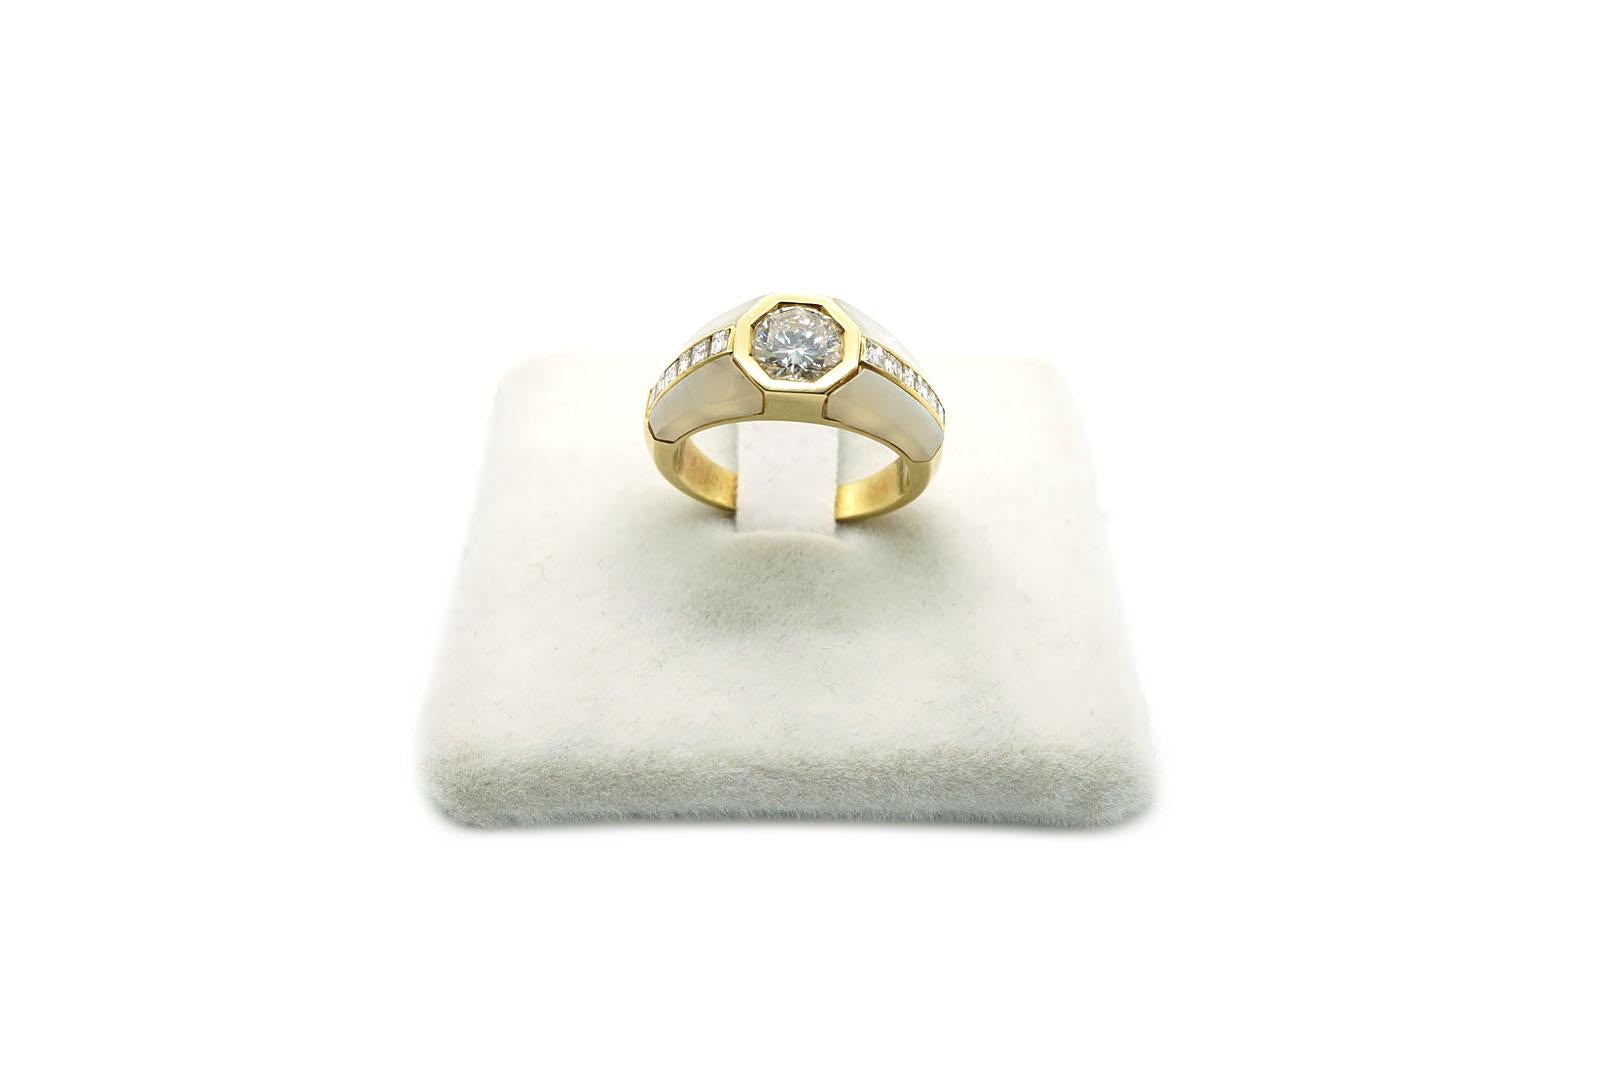 This fine solitaire ring is made in 18 kt yellow gold ( gr 6.00 ).
The central diamond has an hexagonal setting and weighs Ct 1.05.
The ring is embellished with mother-of-pearl inserts and with two rows of carre cut diamonds weighing Ct 0.38.
Art